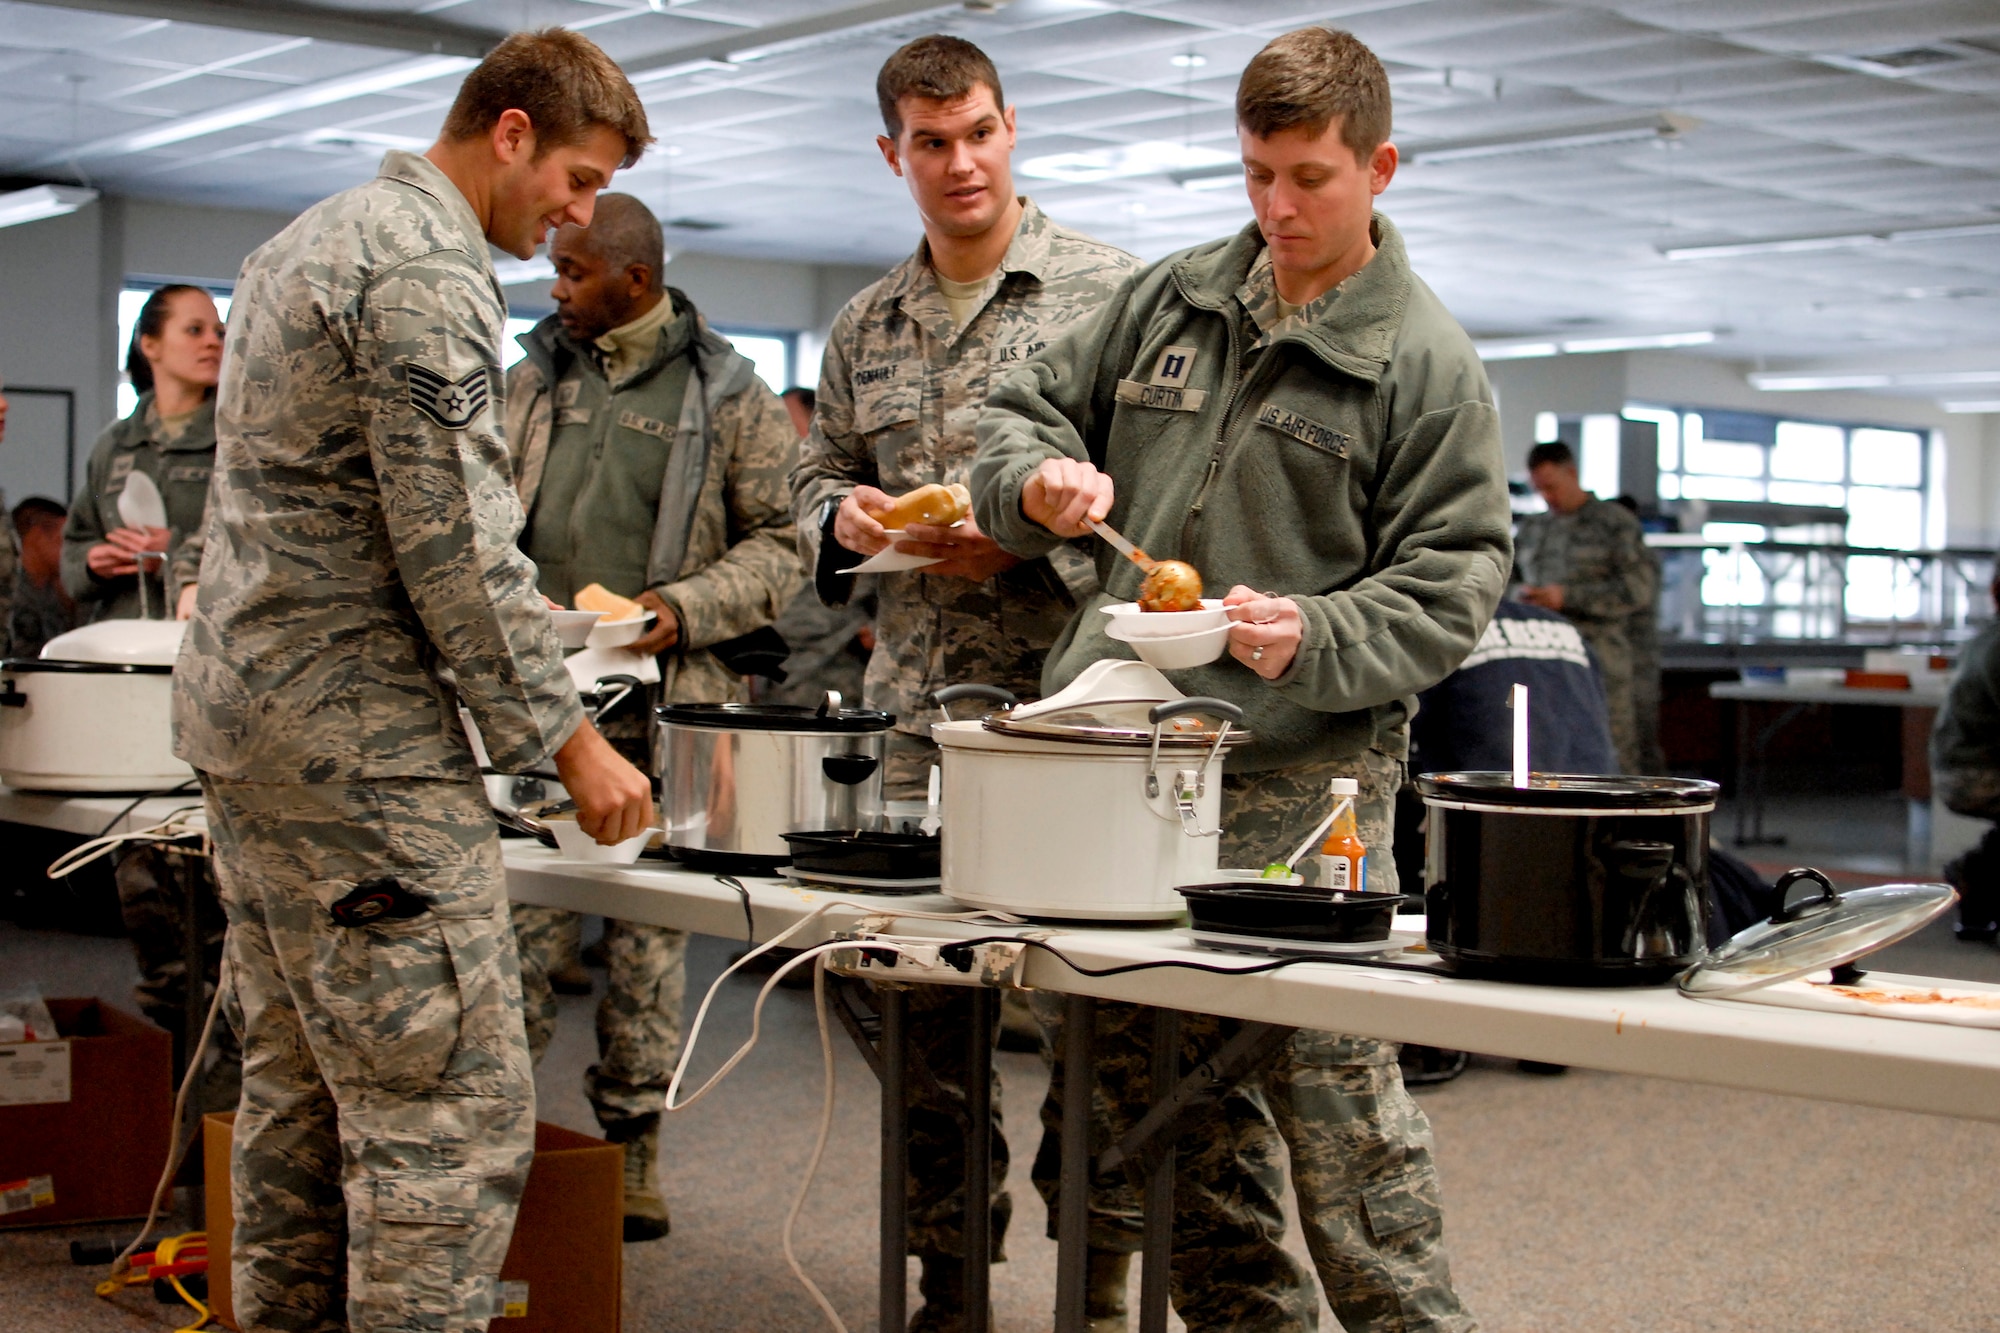 Airmen of the 182nd Airlift Wing sample chili during the sixth-annual chili cook off at the 182nd Airlift Wing, Peoria, Ill., Jan. 8, 2014. The competition placed 13 contestants and their homemade chili recipes against each other to compete for best look and smell, best consistency, and best taste. The event brought out approximately 120 unit members to sample the various white and traditional red entries, and raised $490 in support of operating the wing’s consolidated club. U.S. Air Force Tech. Sgt. Alex R. Sea, vehicle equipment maintenance specialist and winner of the 2014 competition, enjoys the yearly event because he gets to have good chili with good people, he said. “It’s a good way to get out and mingle and talk to the people you don’t usually see on a day-to-day basis.” (U.S. Air National Guard photo by Staff Sgt. Lealan Buehrer/Released. Image was cropped to emphasize the subjects.)